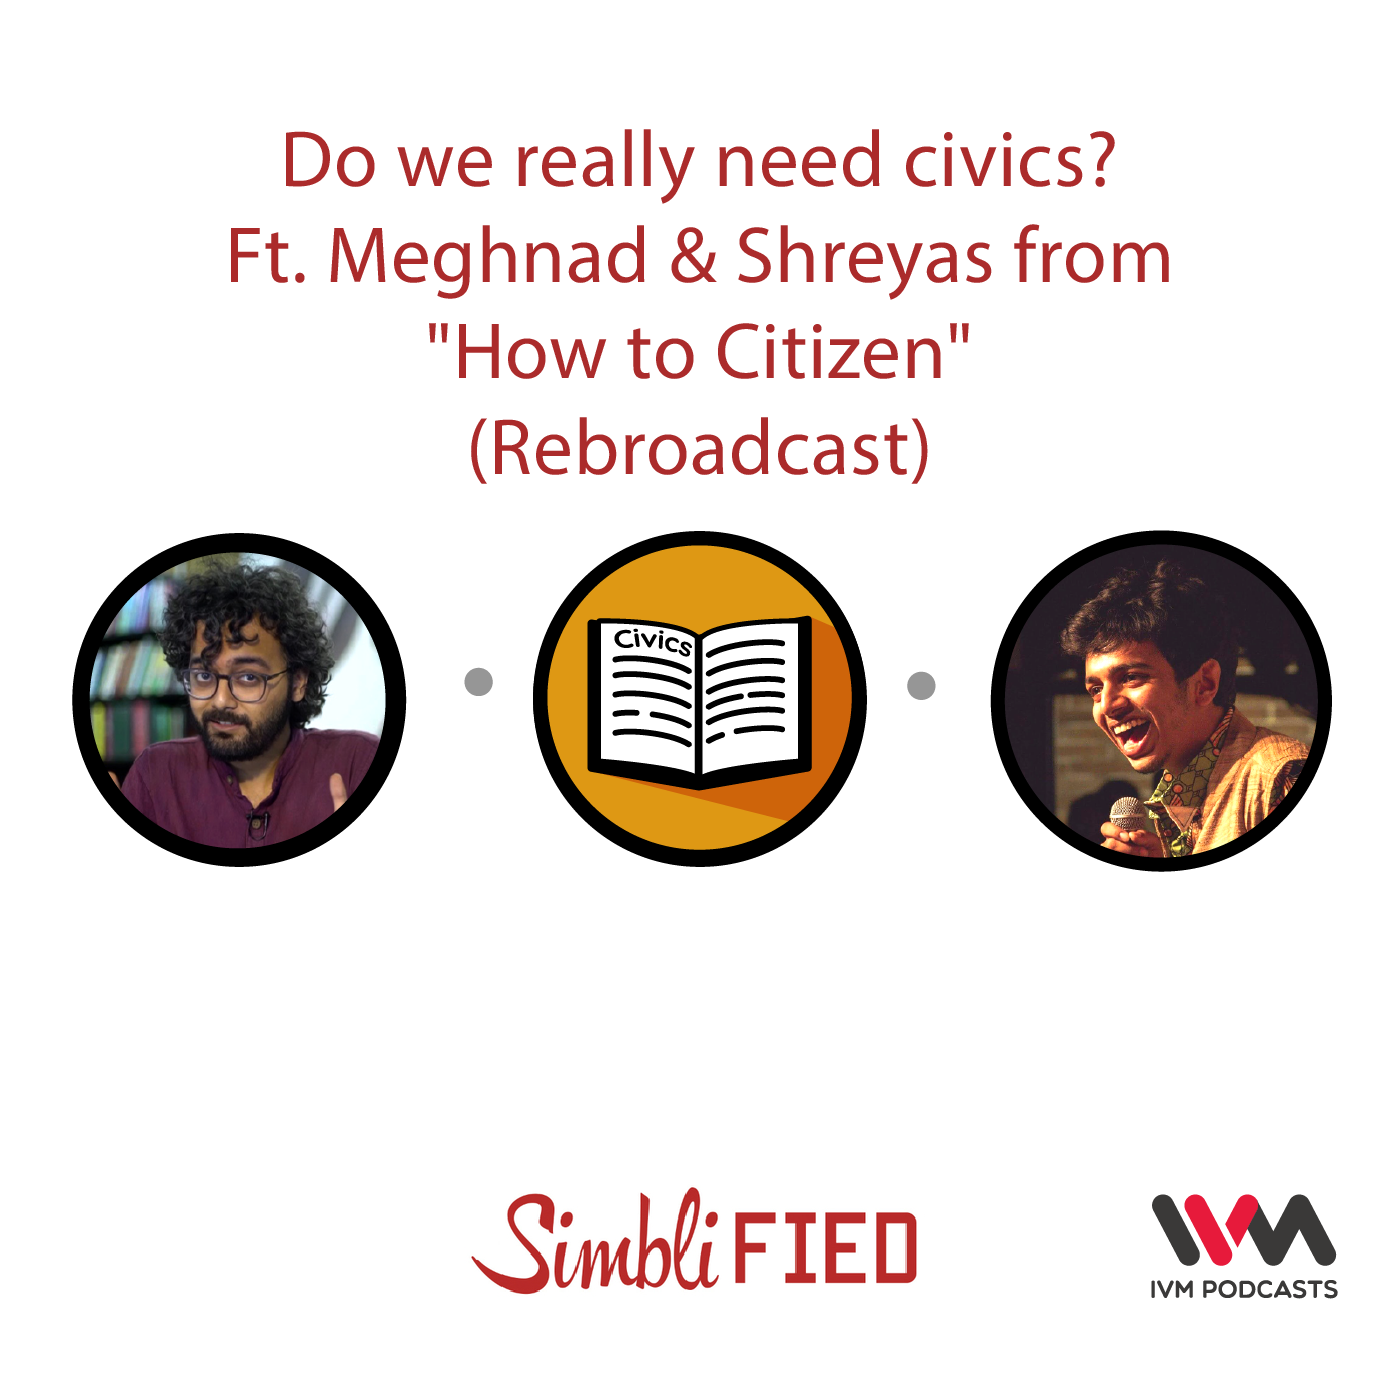 Ep. 122 (Rebroadcasting): Do you really need civics? Ft. Meghnad & Shreyas from "How to Citizen"